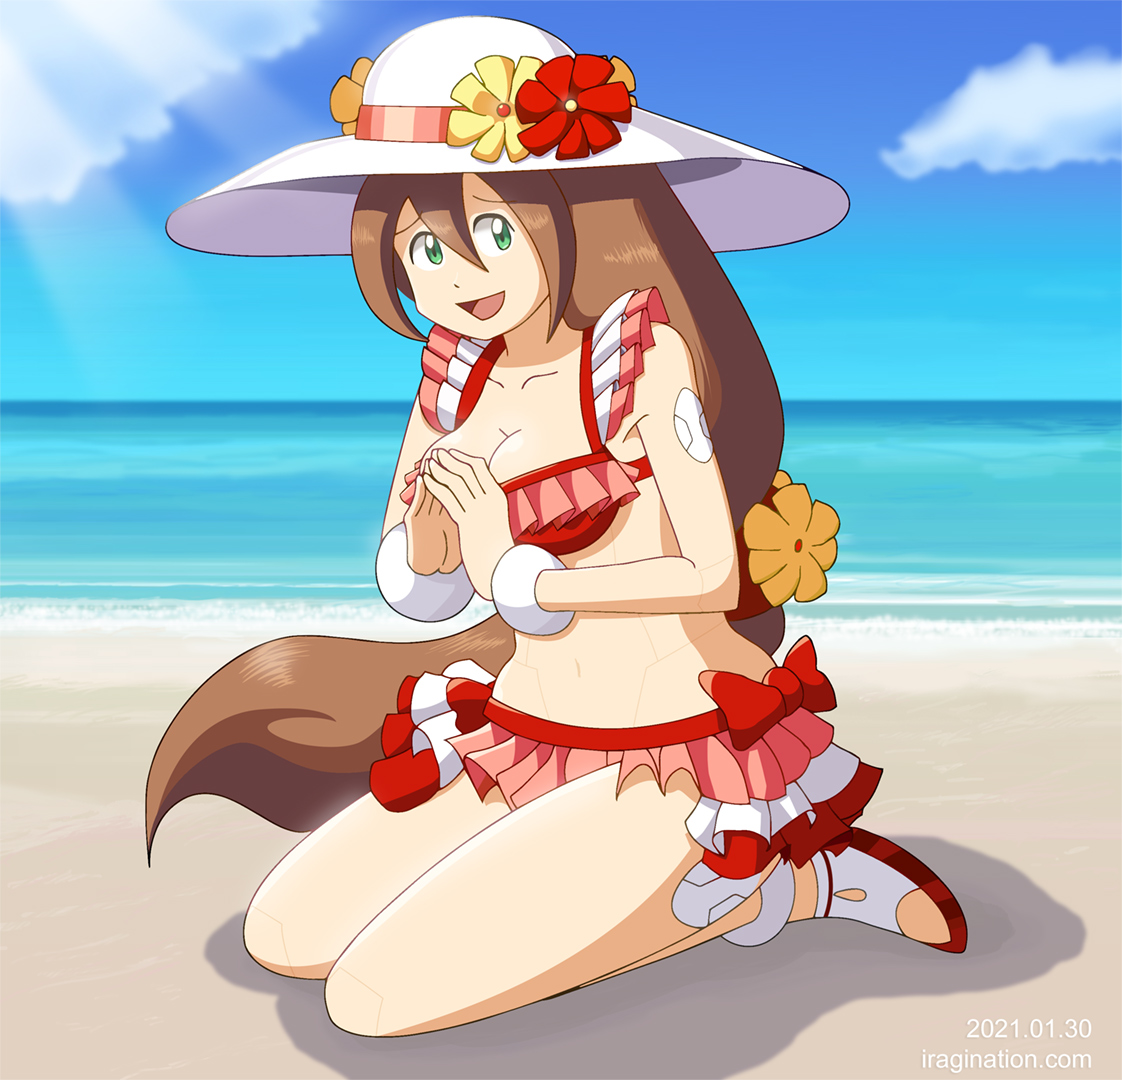 Swimsuit Iris
I had this sketched out since August last year, during the previous summer event, but it was peak busy time for me, and I could not complete it. This month, the Rockman X DiVE team [url=https://www.facebook.com/CAPCOM.RXD/posts/692258124803613]repeated the summer event[/url] sooner than I had expected, so this was a good time to complete this work.

I just noticed that Iris' hairstyle is significantly different in this design. I did notice that her hair was way longer, but paid not much attention to the change in her bangs and stick with the original design. Apparently, I am terrible at noticing these things and that always gets me in trouble. Next time I will take care of that.
Keywords: iris